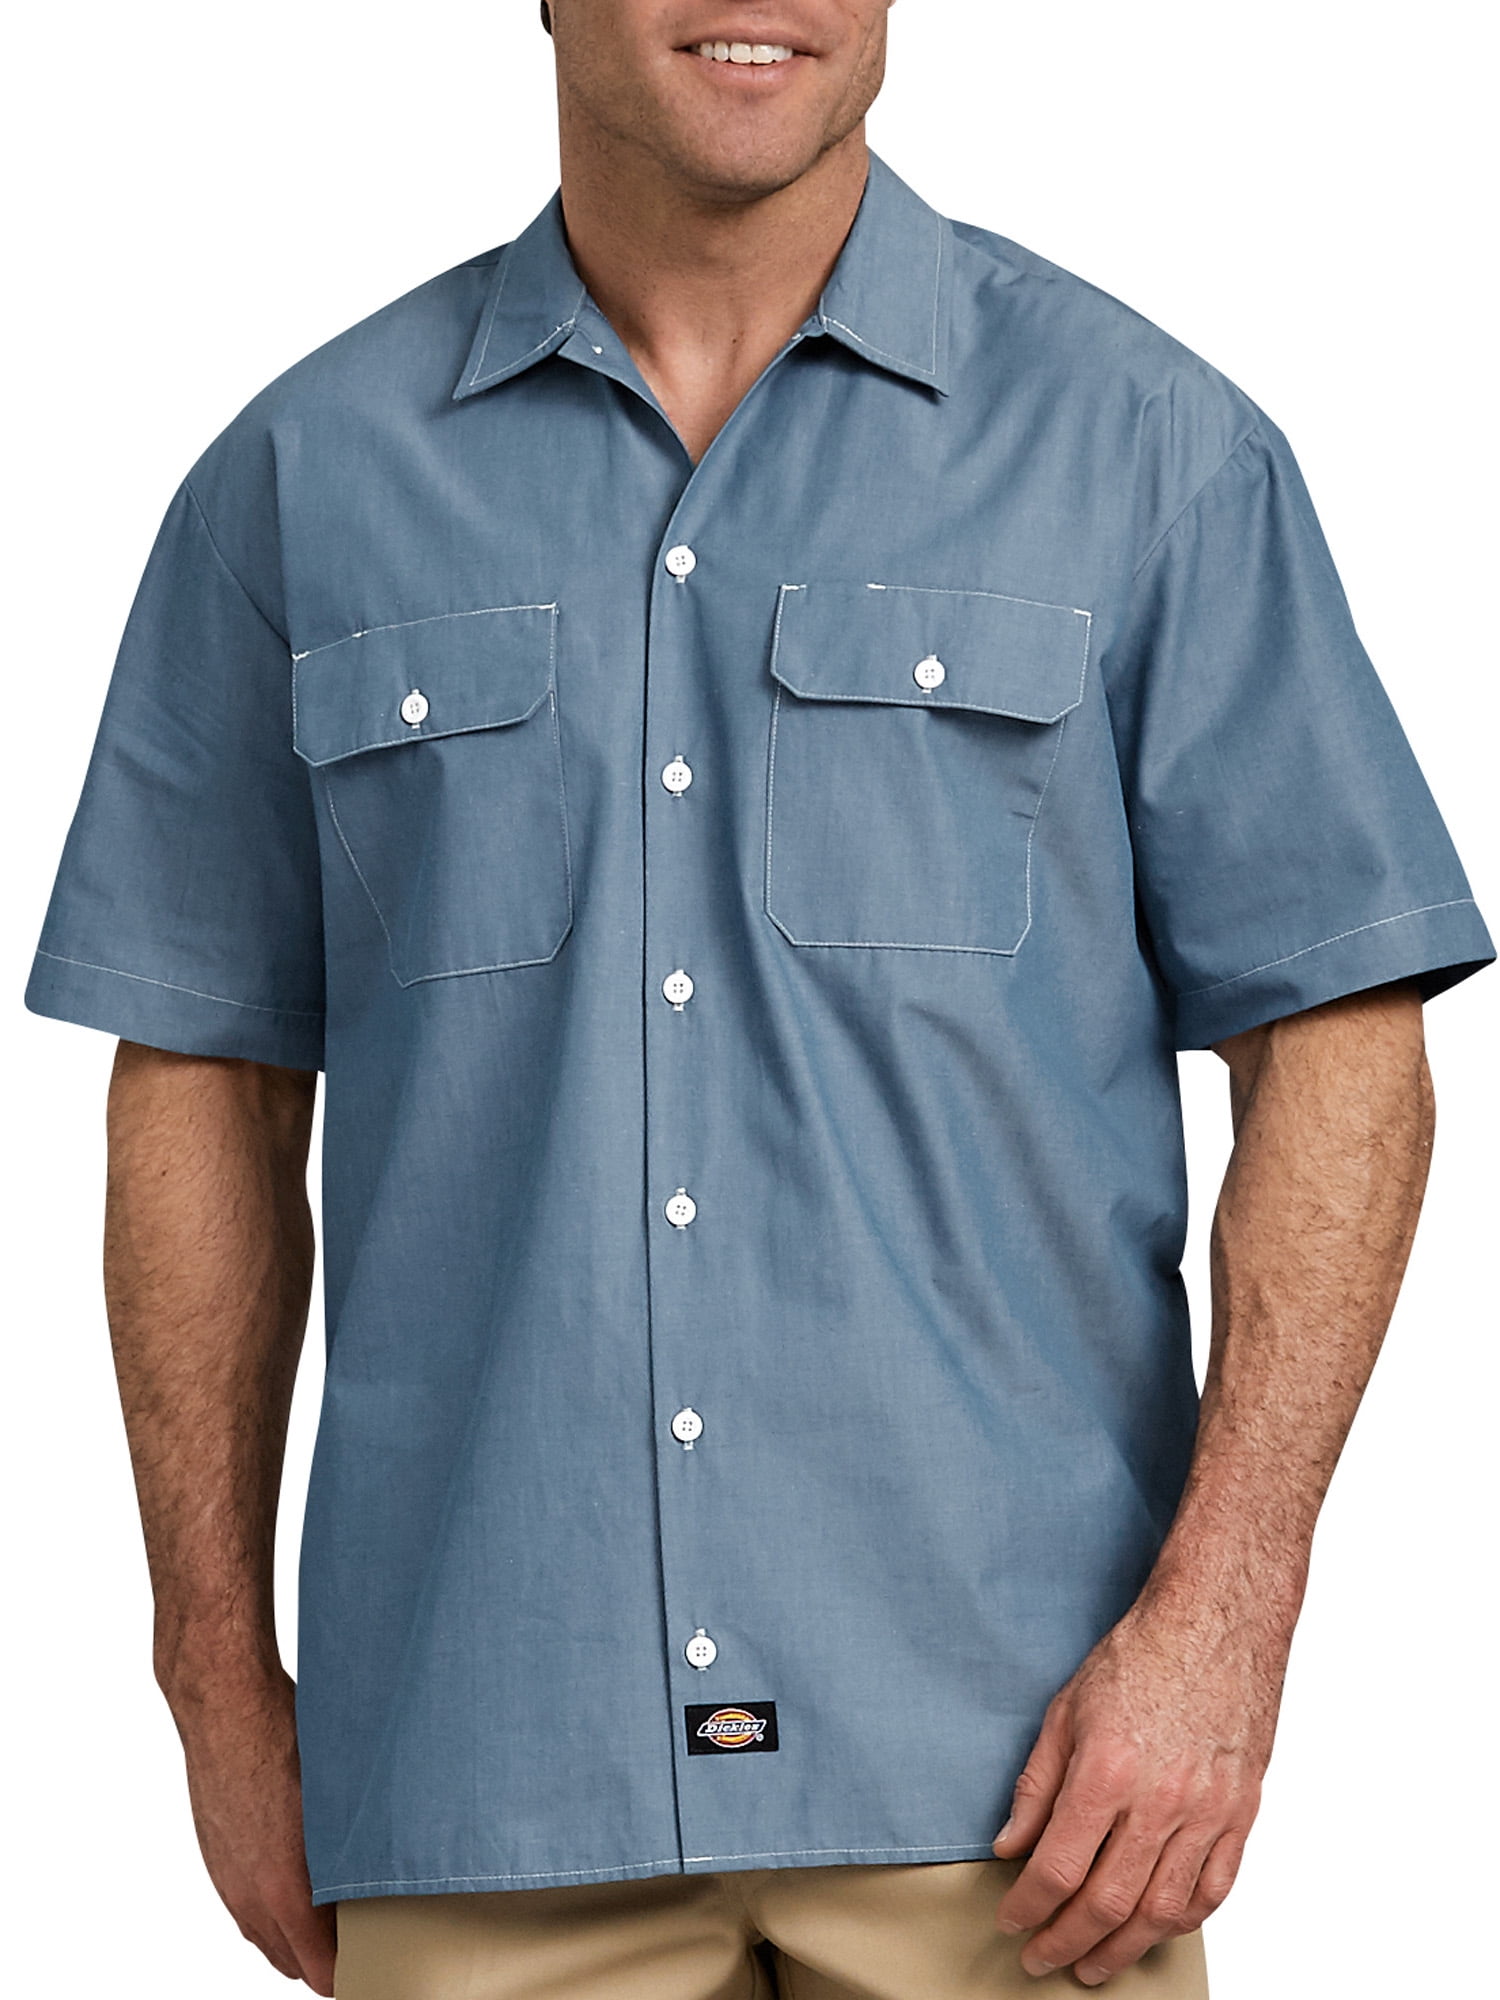 Genuine Dickies Relaxed Fit Short Sleeve Collared Cotton Polyester Work  Shirt (Men's), 1 Count, 1 Pack 